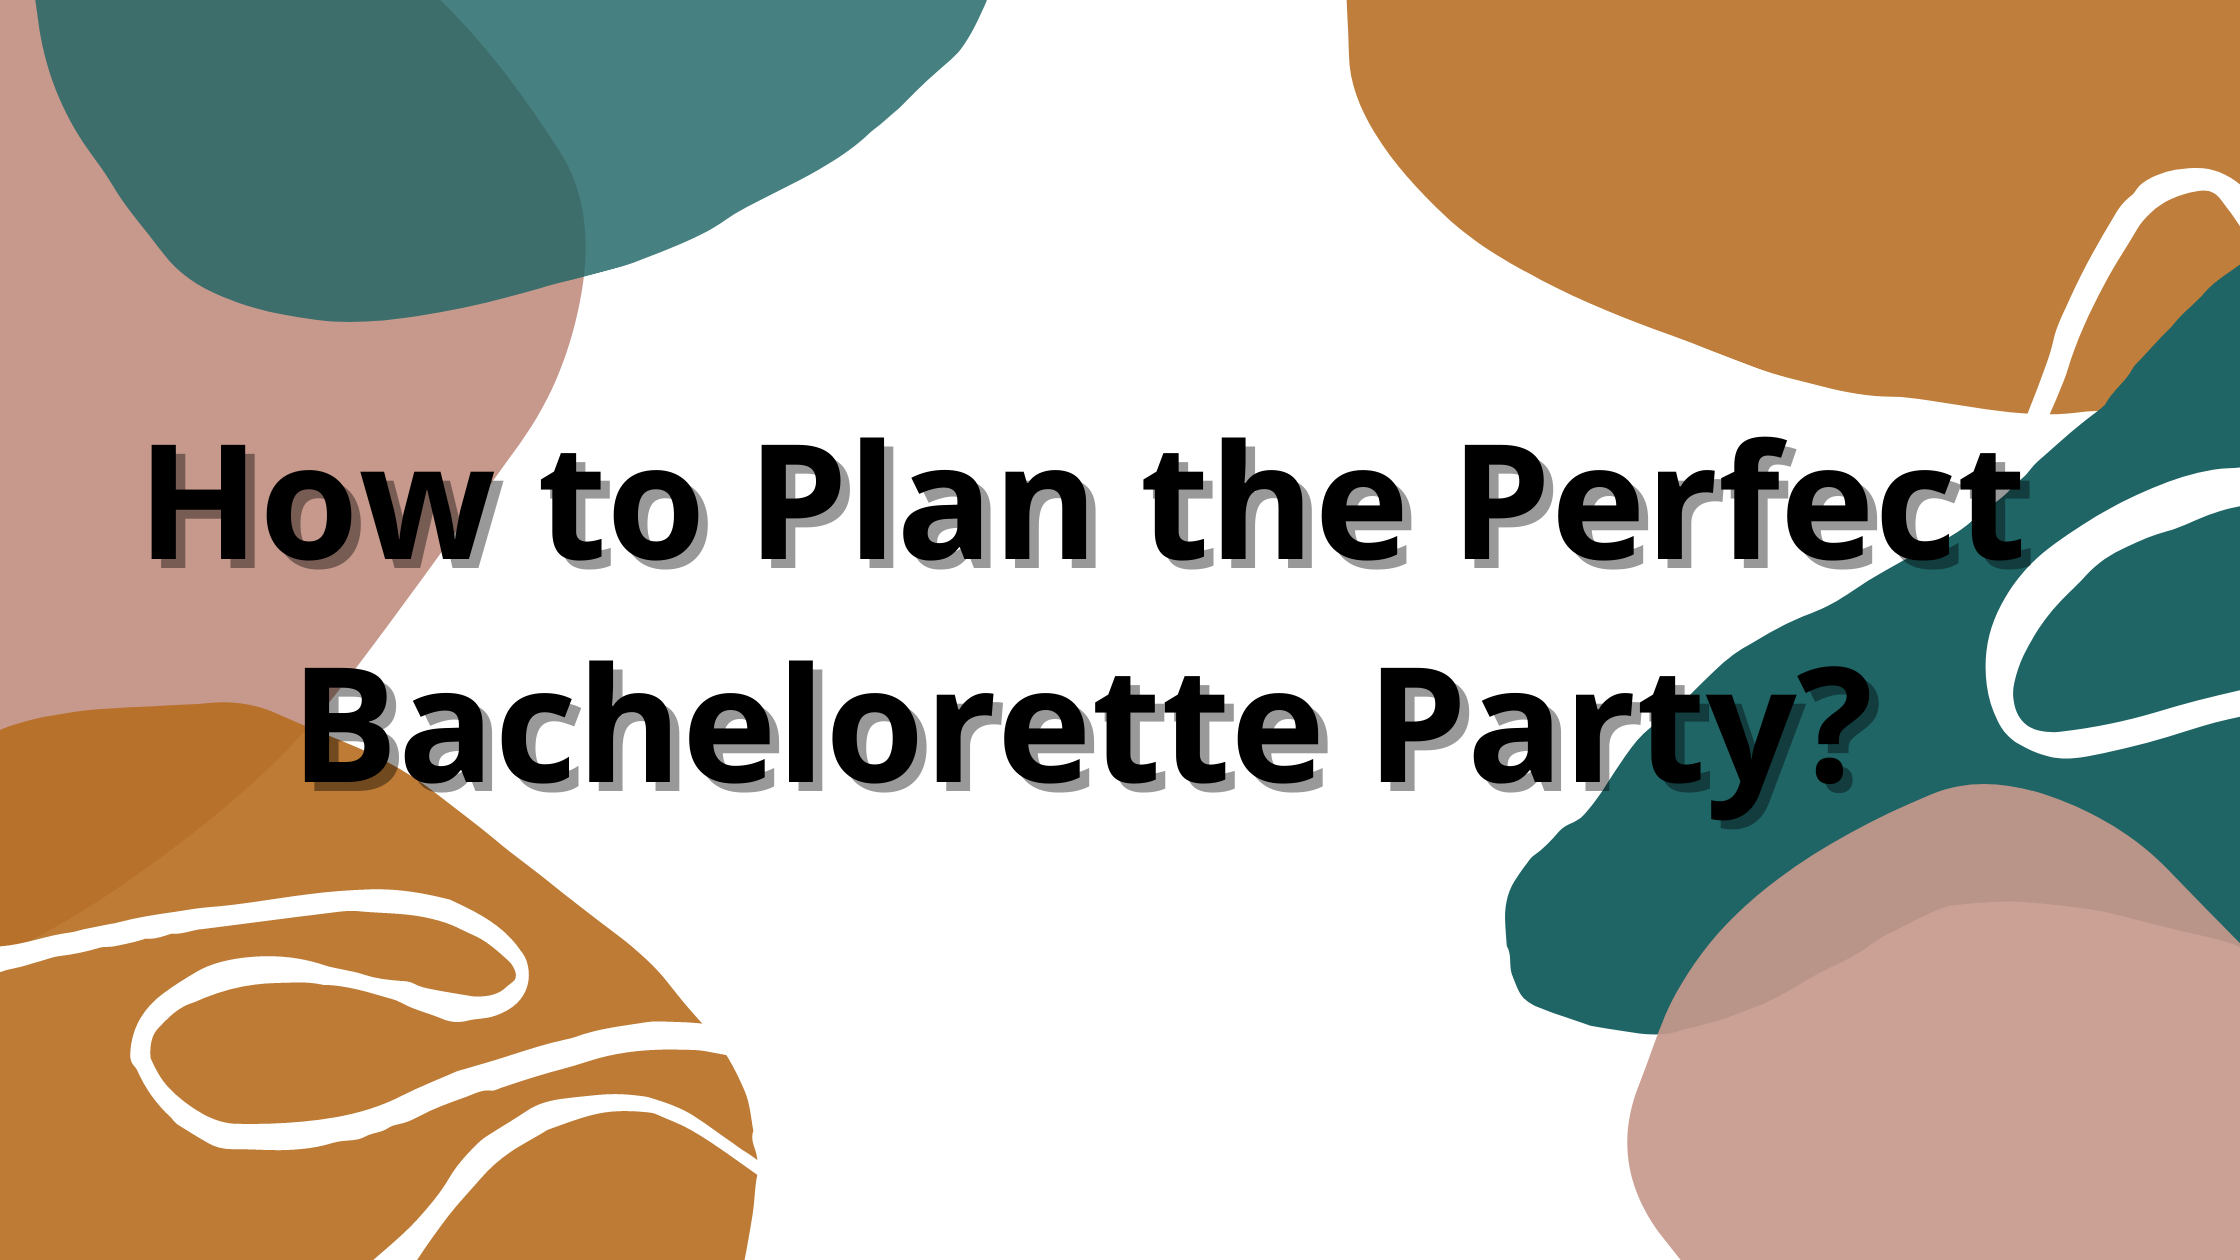 How to Plan the Perfect Bachelorette Party?